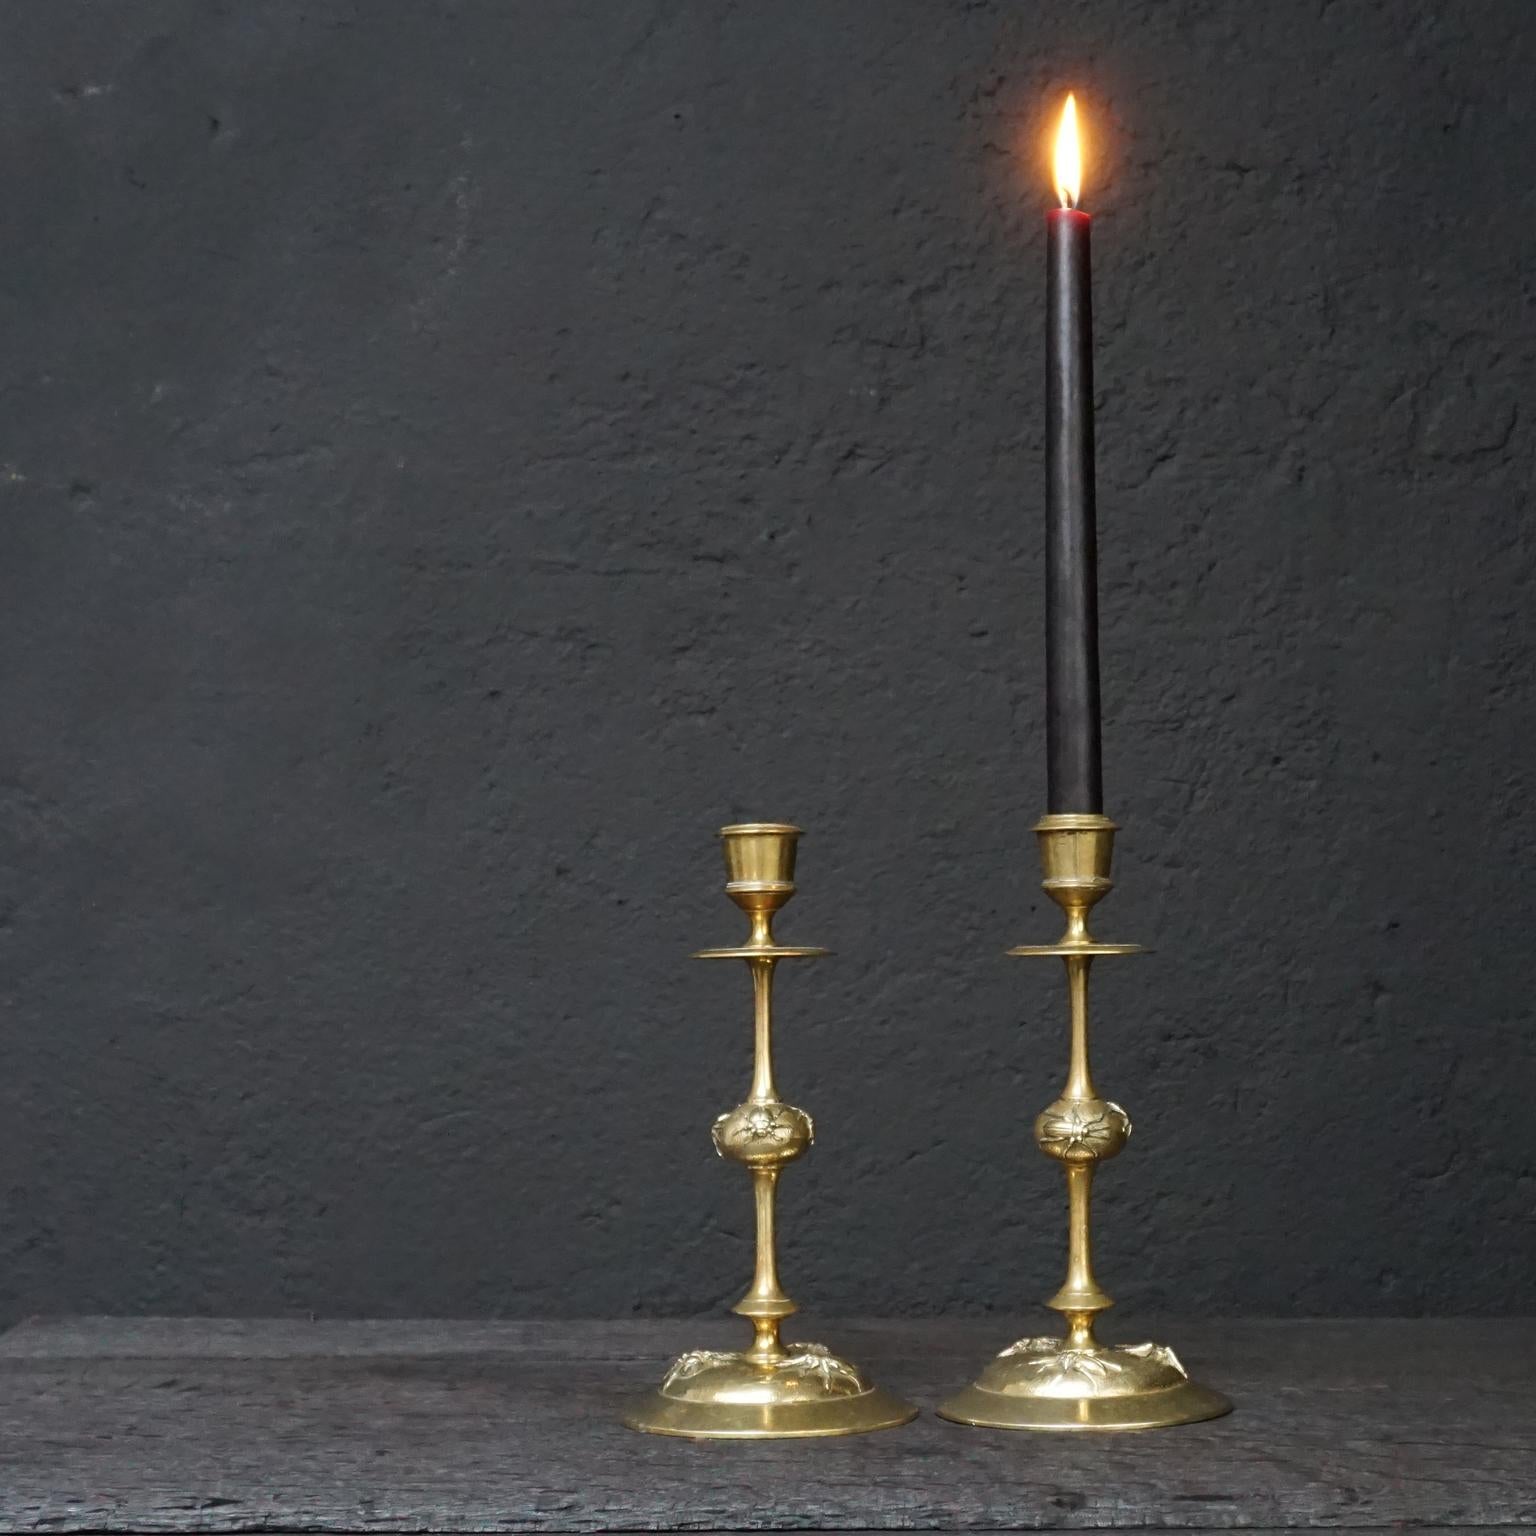 Art Nouveau 19th Century French Brass Candle Holders, Candlesticks with Beetle Decoration